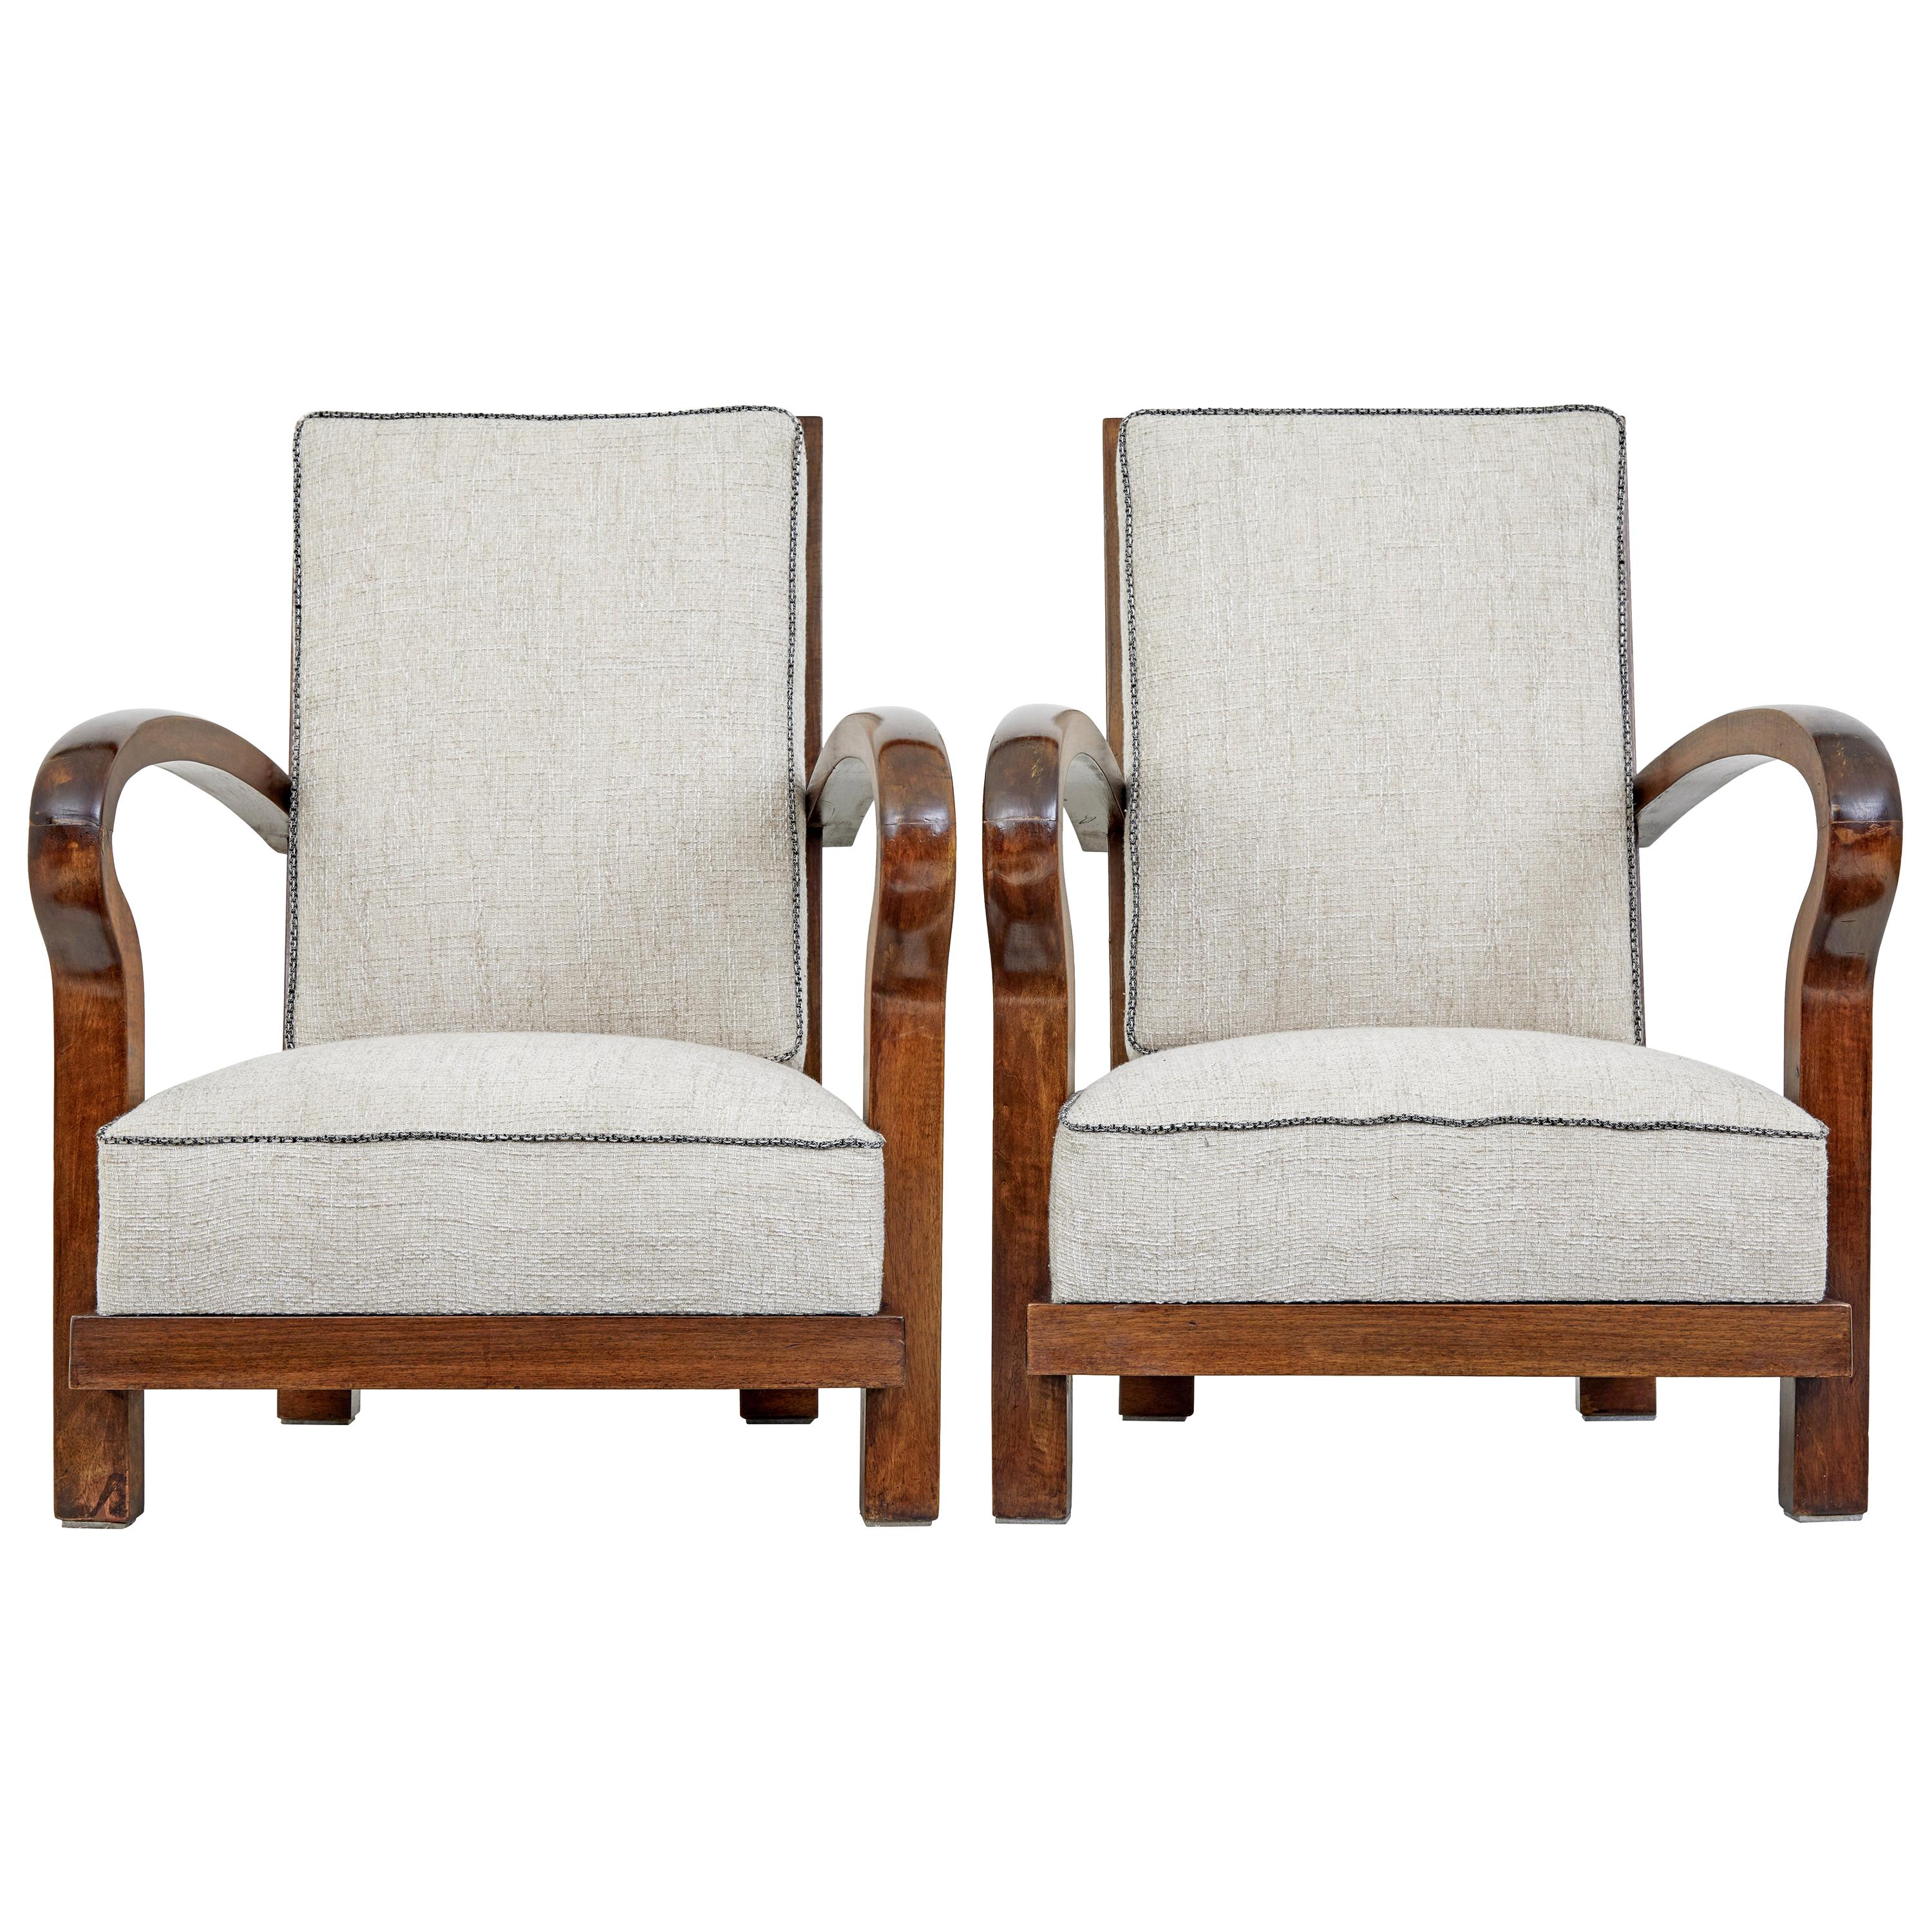 Pair of Mid-20th Century Walnut Open Frame Lounge Chairs